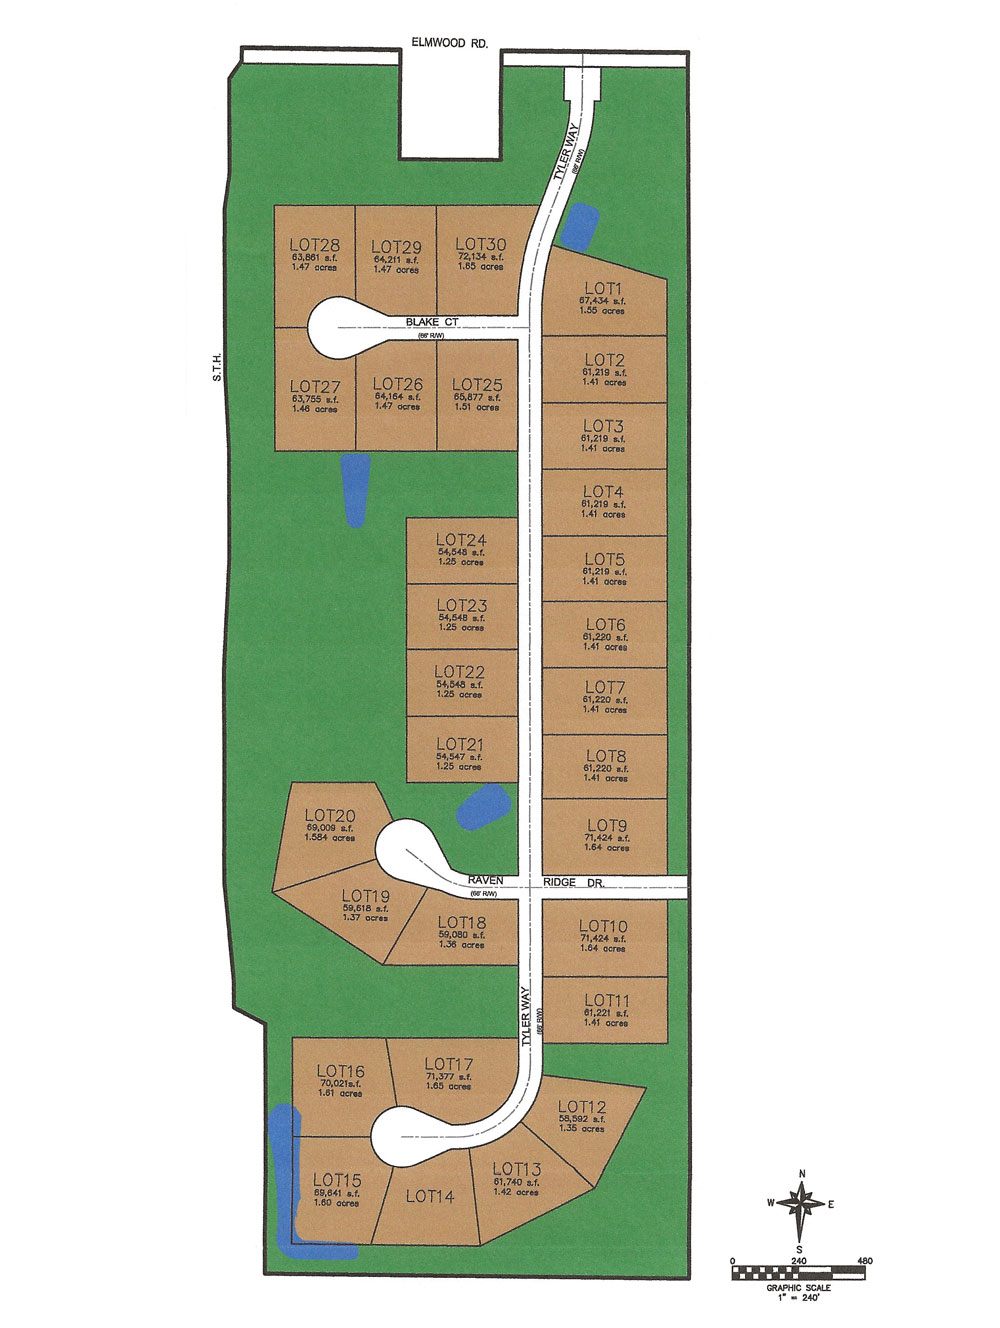 Elmwood Heights plat - Richfield, WI - Land available from Victory Homes of Wisconsin.